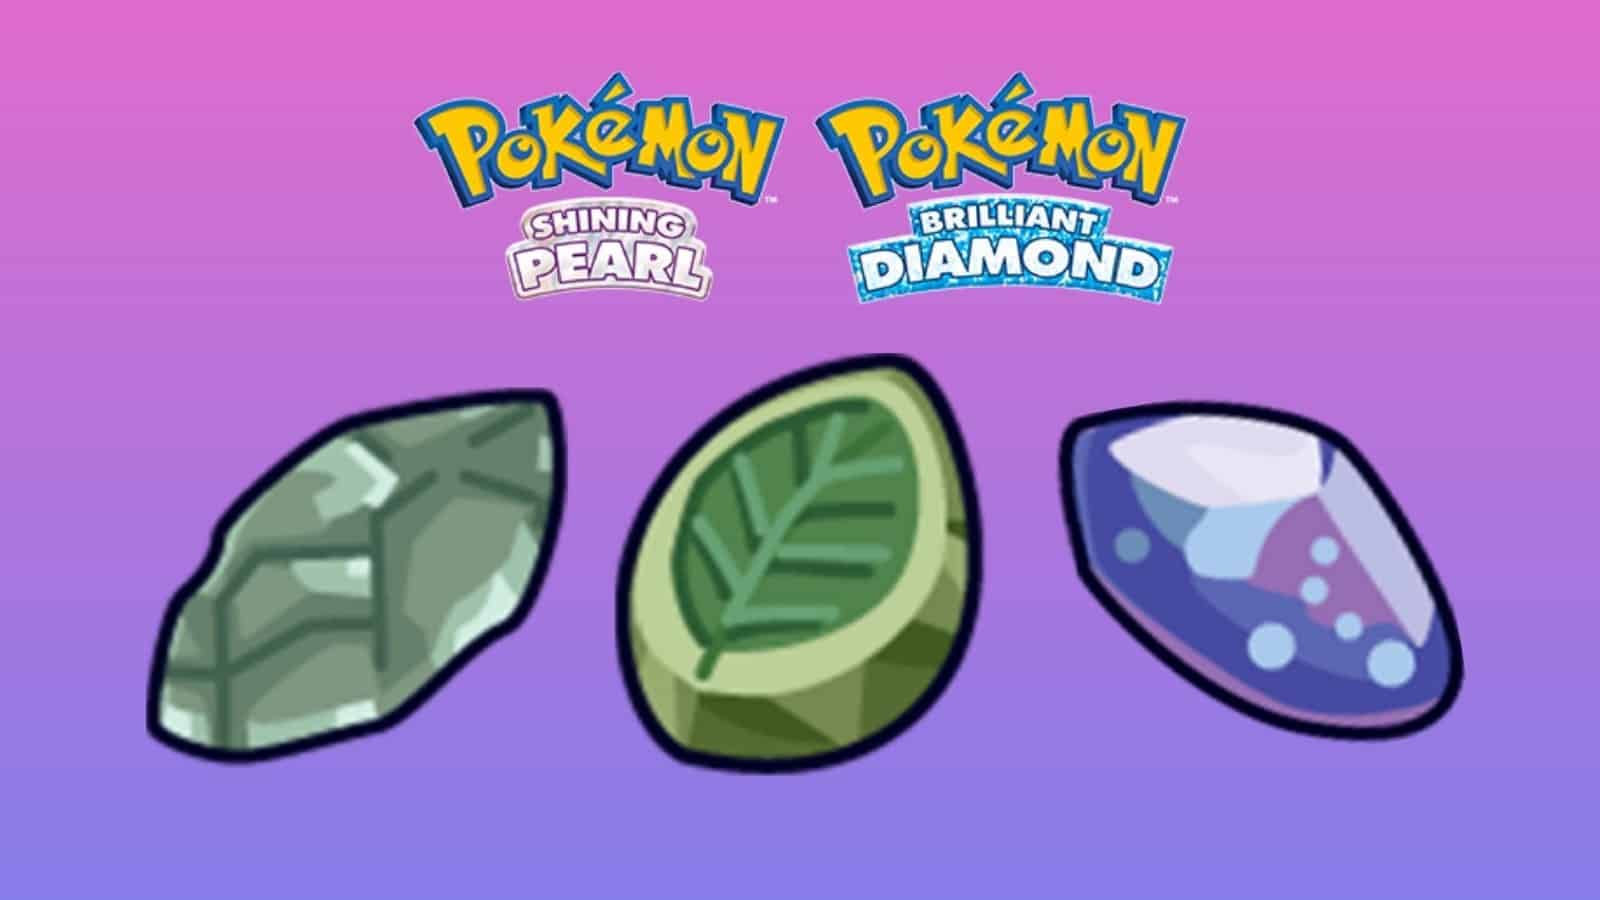 How to Get Dawn Stones - Pokemon Diamond, Pearl and Platinum Guide